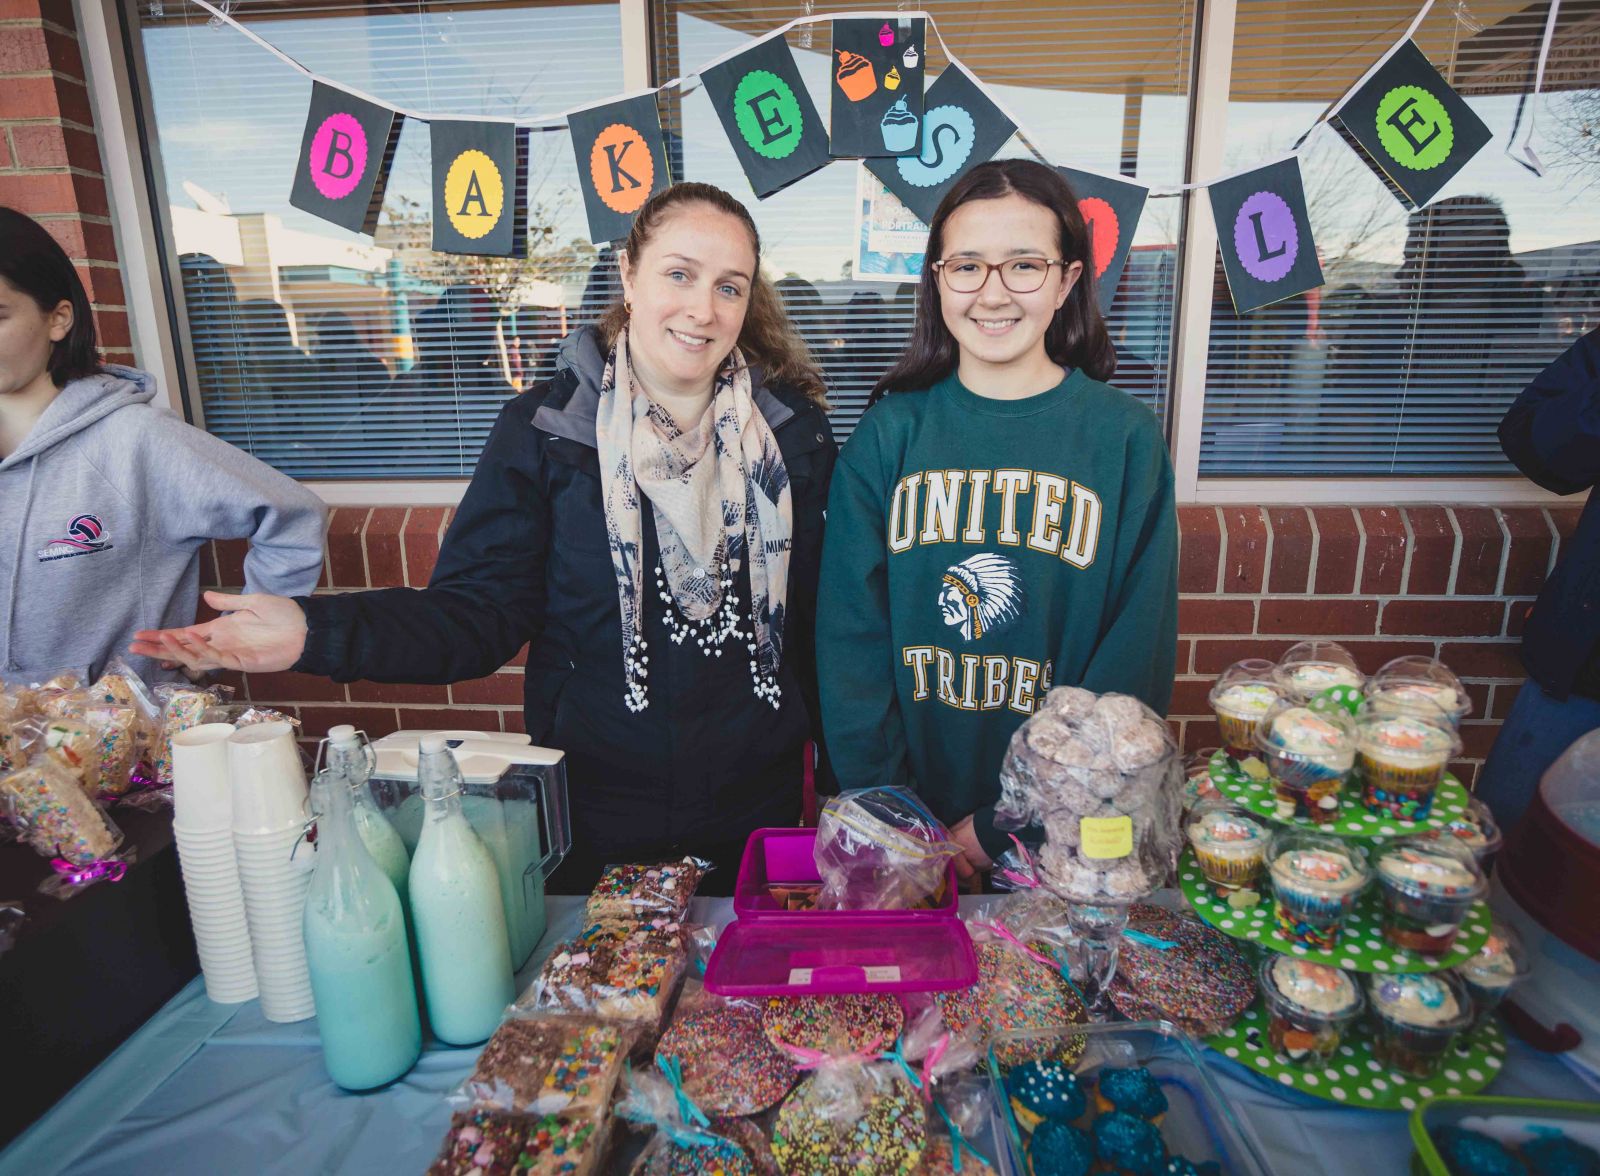 Teachers and Students have a bake sale for St Peter's Day